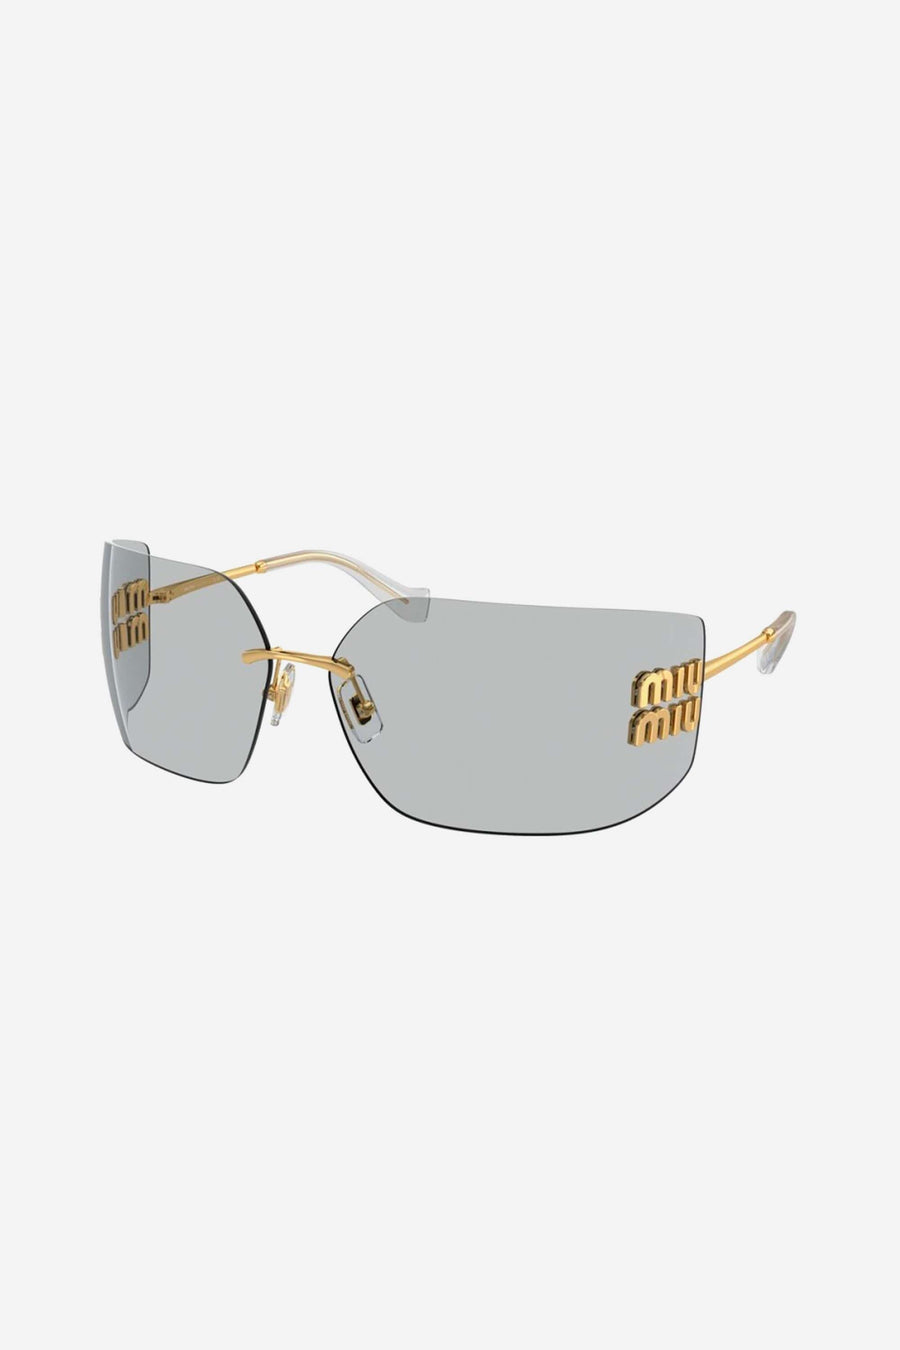 Miu Miu squared metal sunglasses with blue mirror and gold details